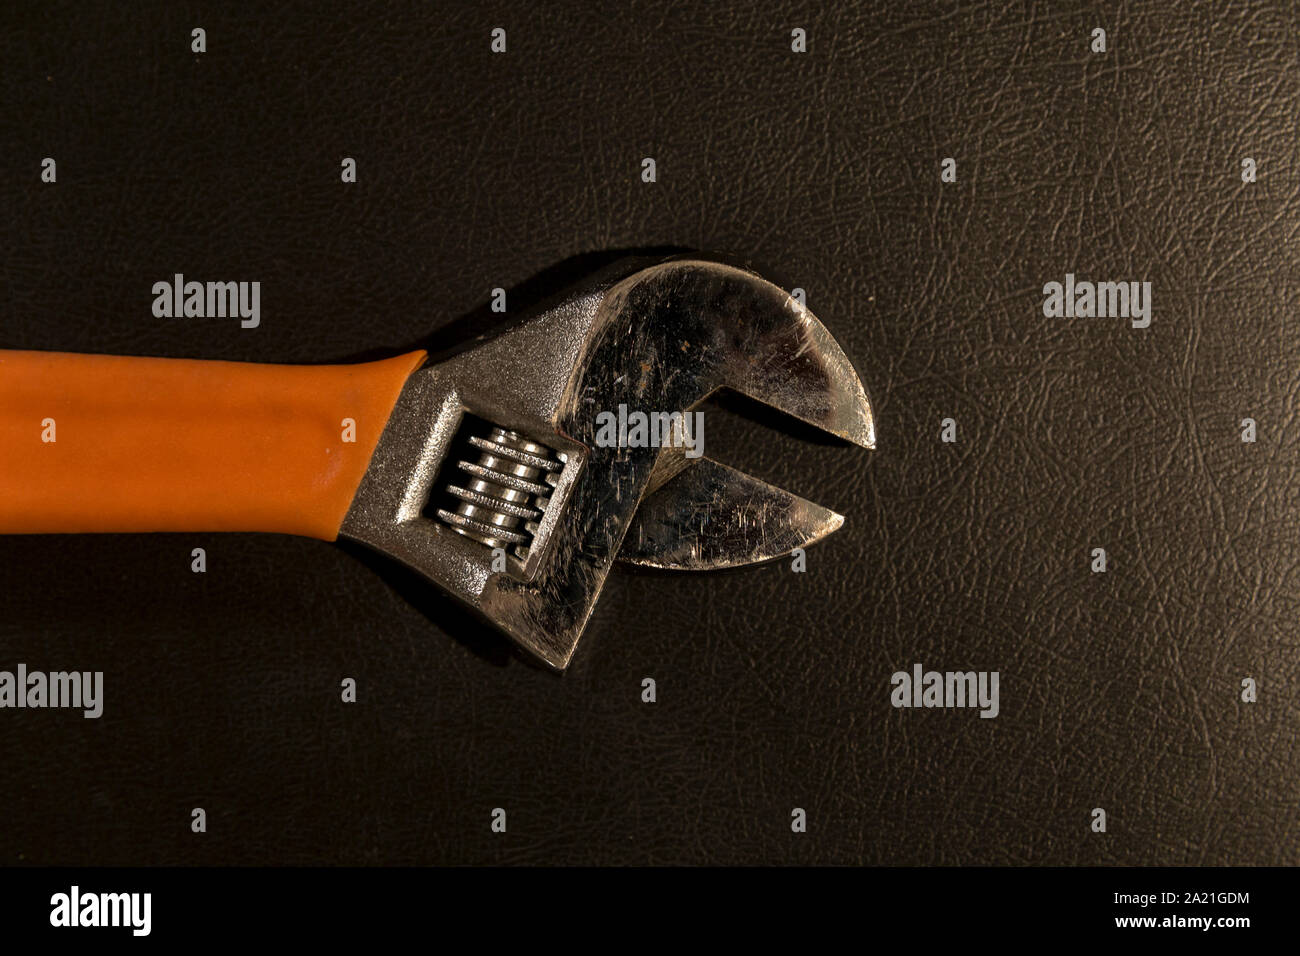 Top view close up of the head of an adjustable wrench with plastic orange handle, lying on leather surface. Stock Photo